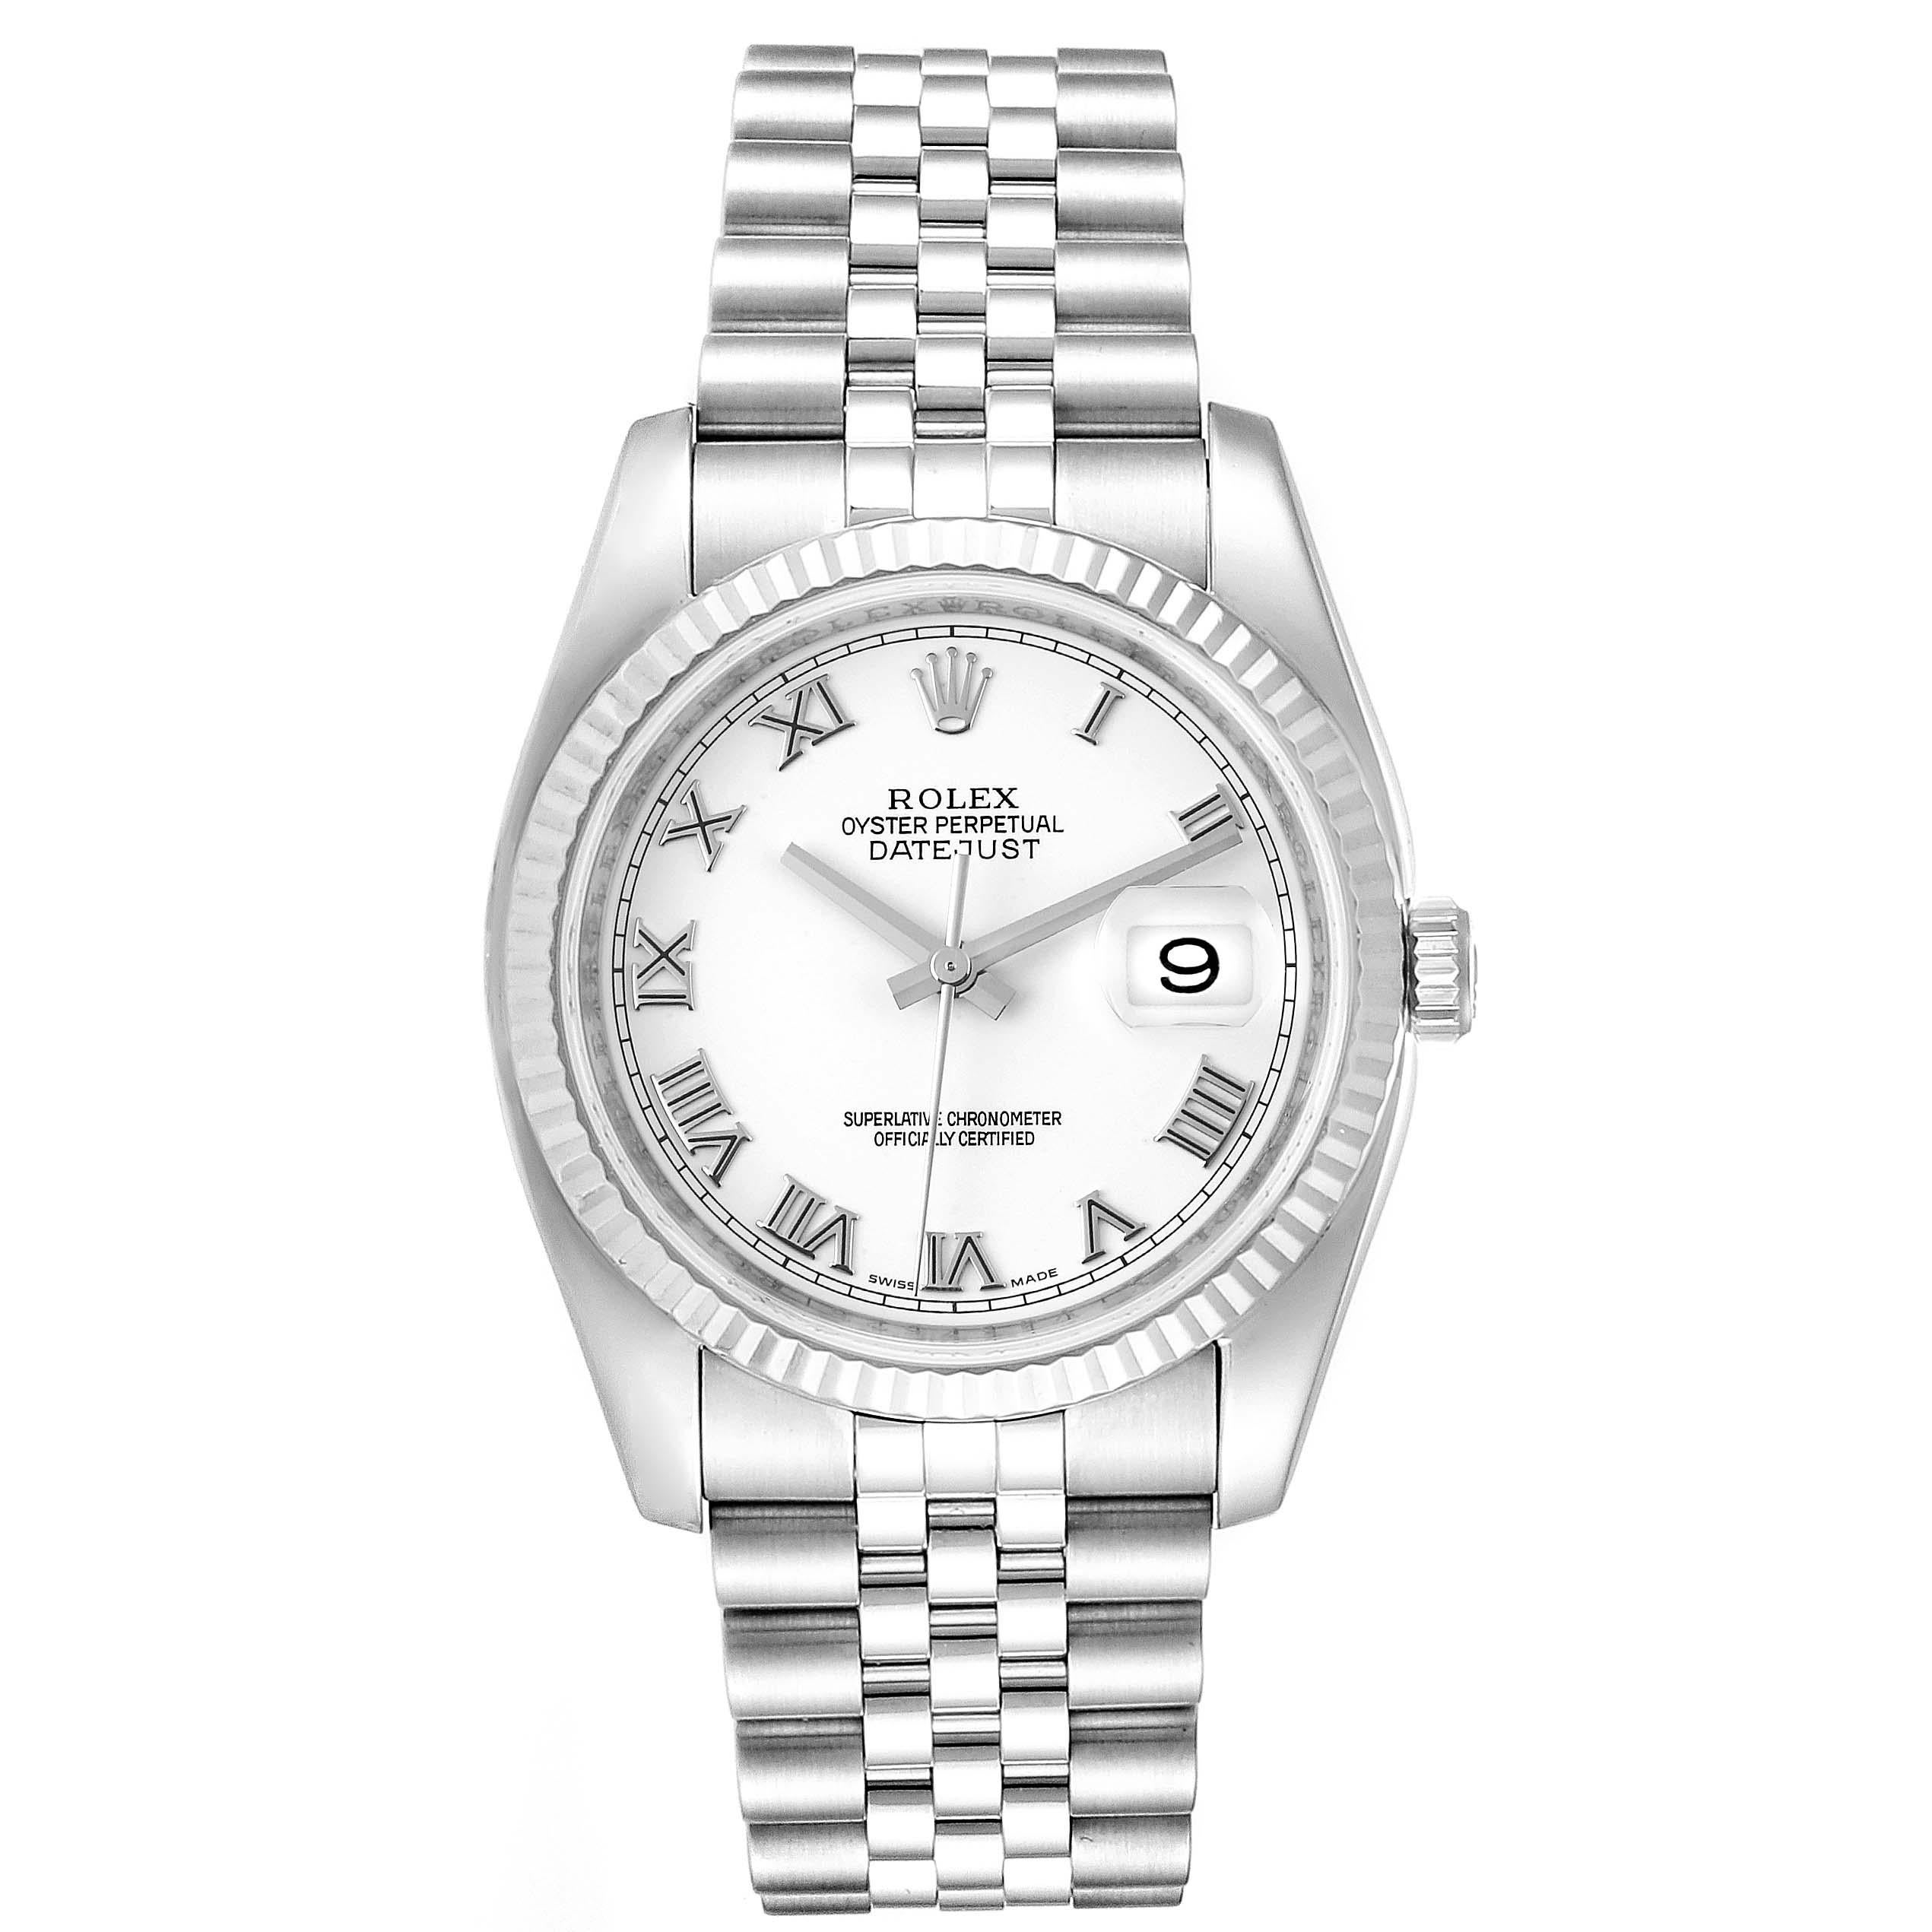 Rolex Datejust Steel White Gold Jubilee Bracelet Watch 116234. Officially certified chronometer self-winding movement. Stainless steel case 36.0 mm in diameter. Rolex logo on a crown. 18K white gold fluted bezel. Scratch resistant sapphire crystal